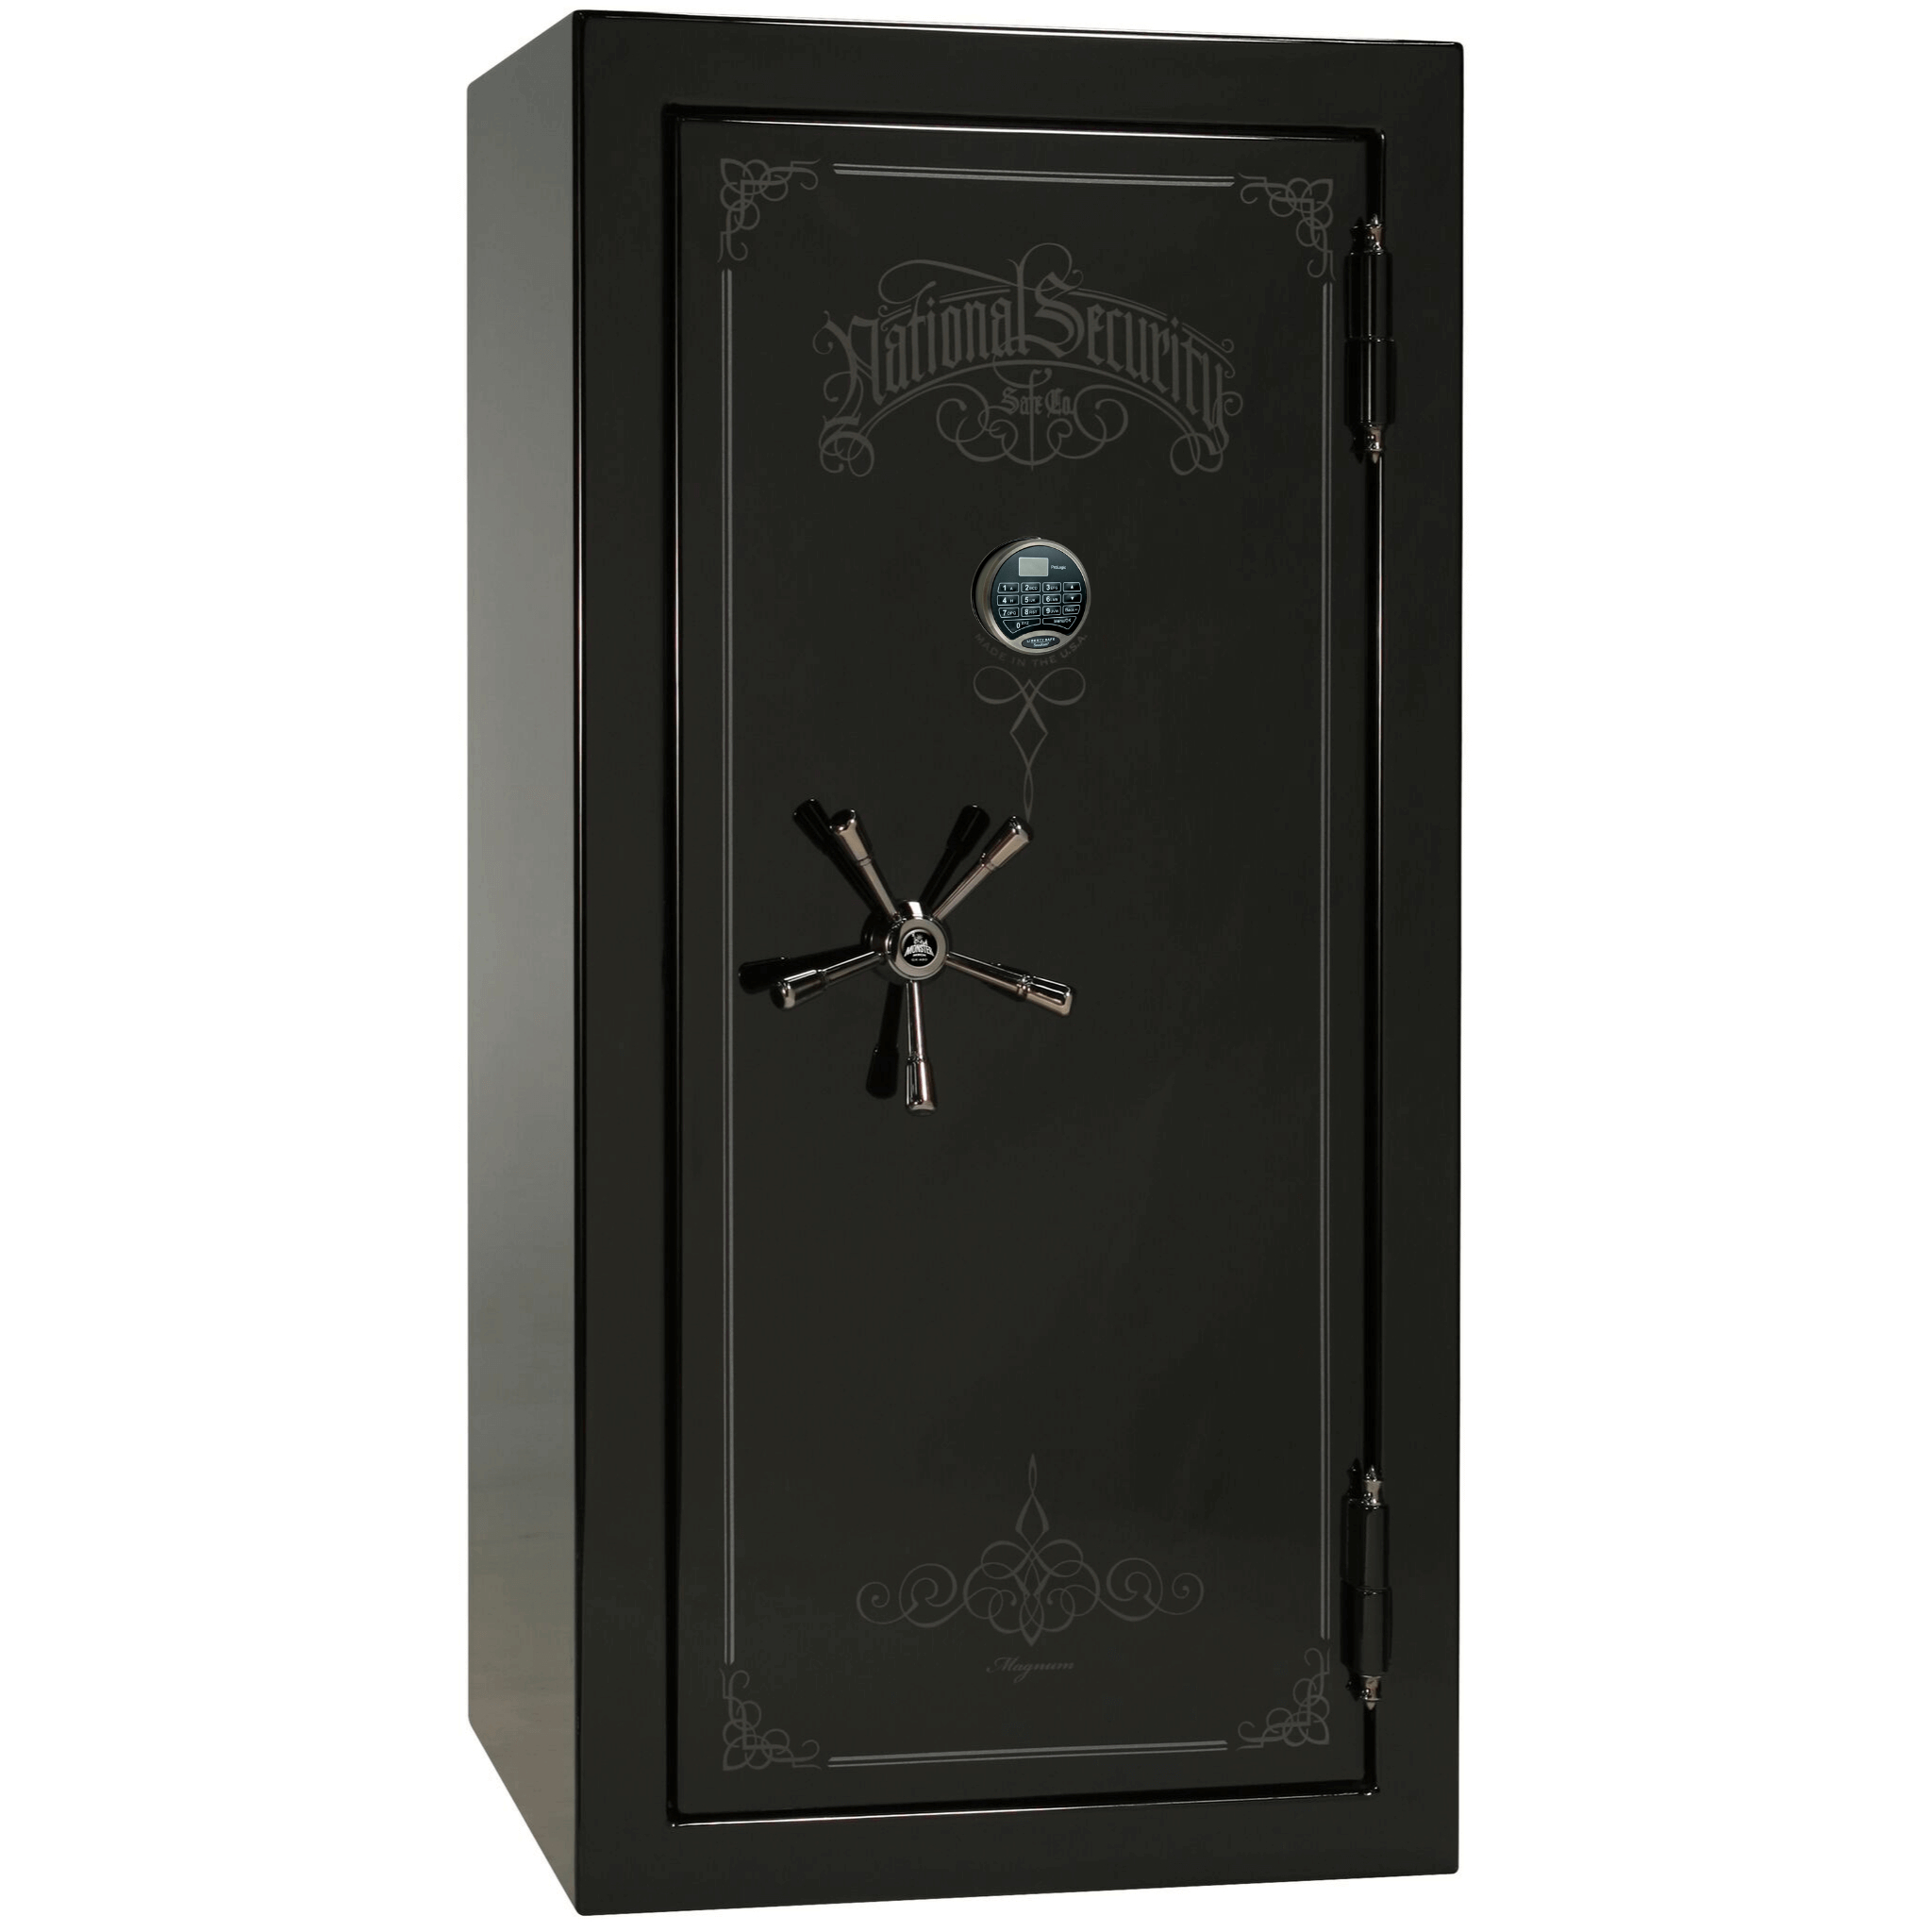 Magnum Series | Level 8 Security | 2.5 Hours Fire Protection | 25 | Dimensions: 60.5"(H) x 30"(W) x 28.5"(D) | Charcoal 2 Tone | Mechanical Lock, photo 27